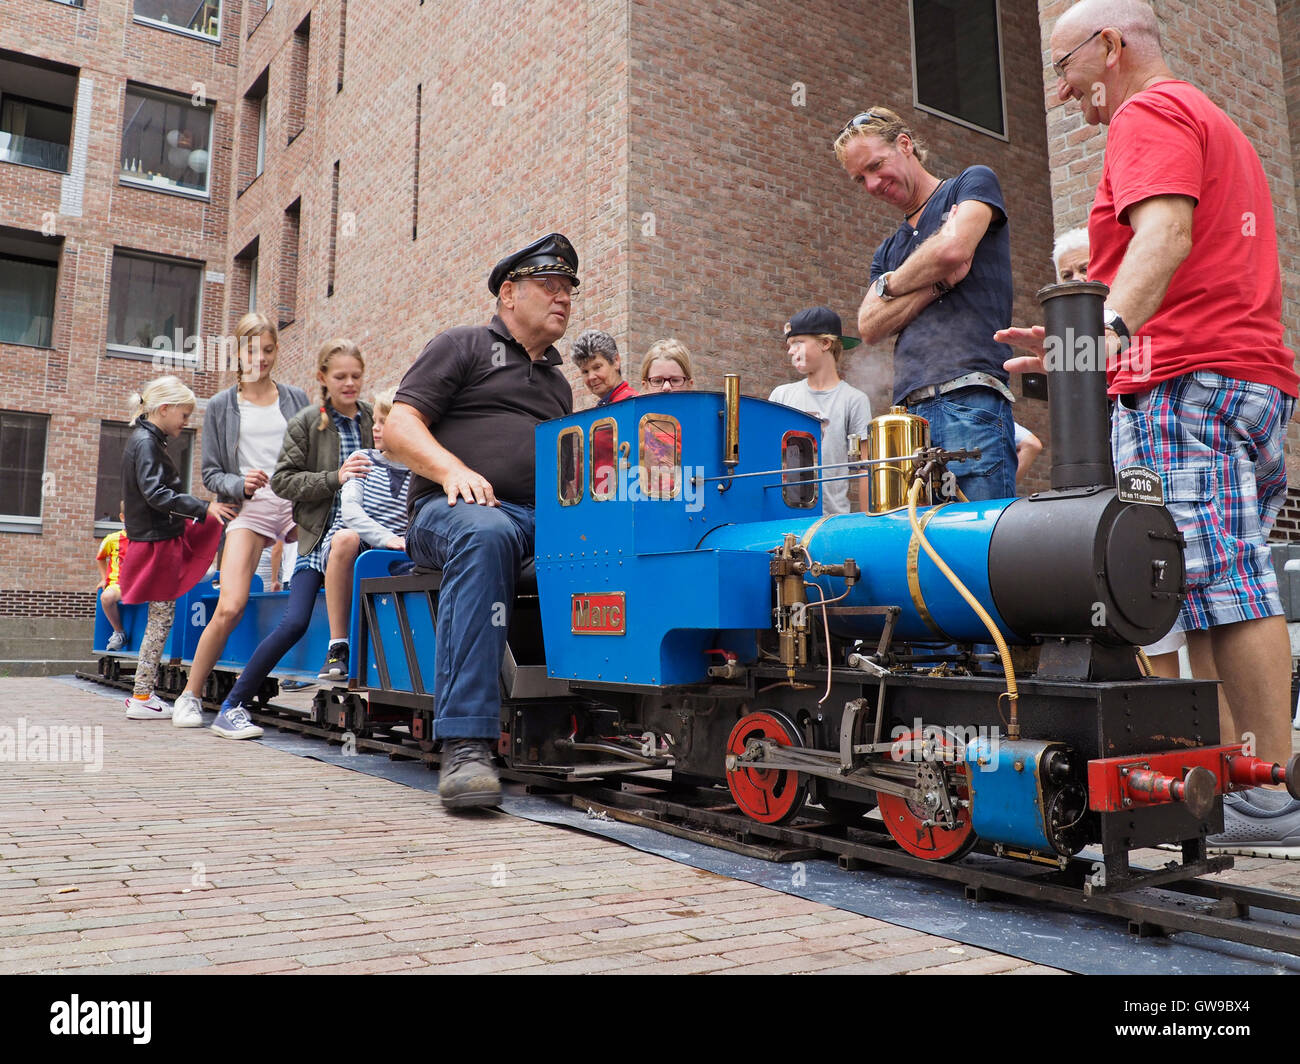 Large toy train with real steam engine powering it. Breda central train station, the Netherlands Stock Photo